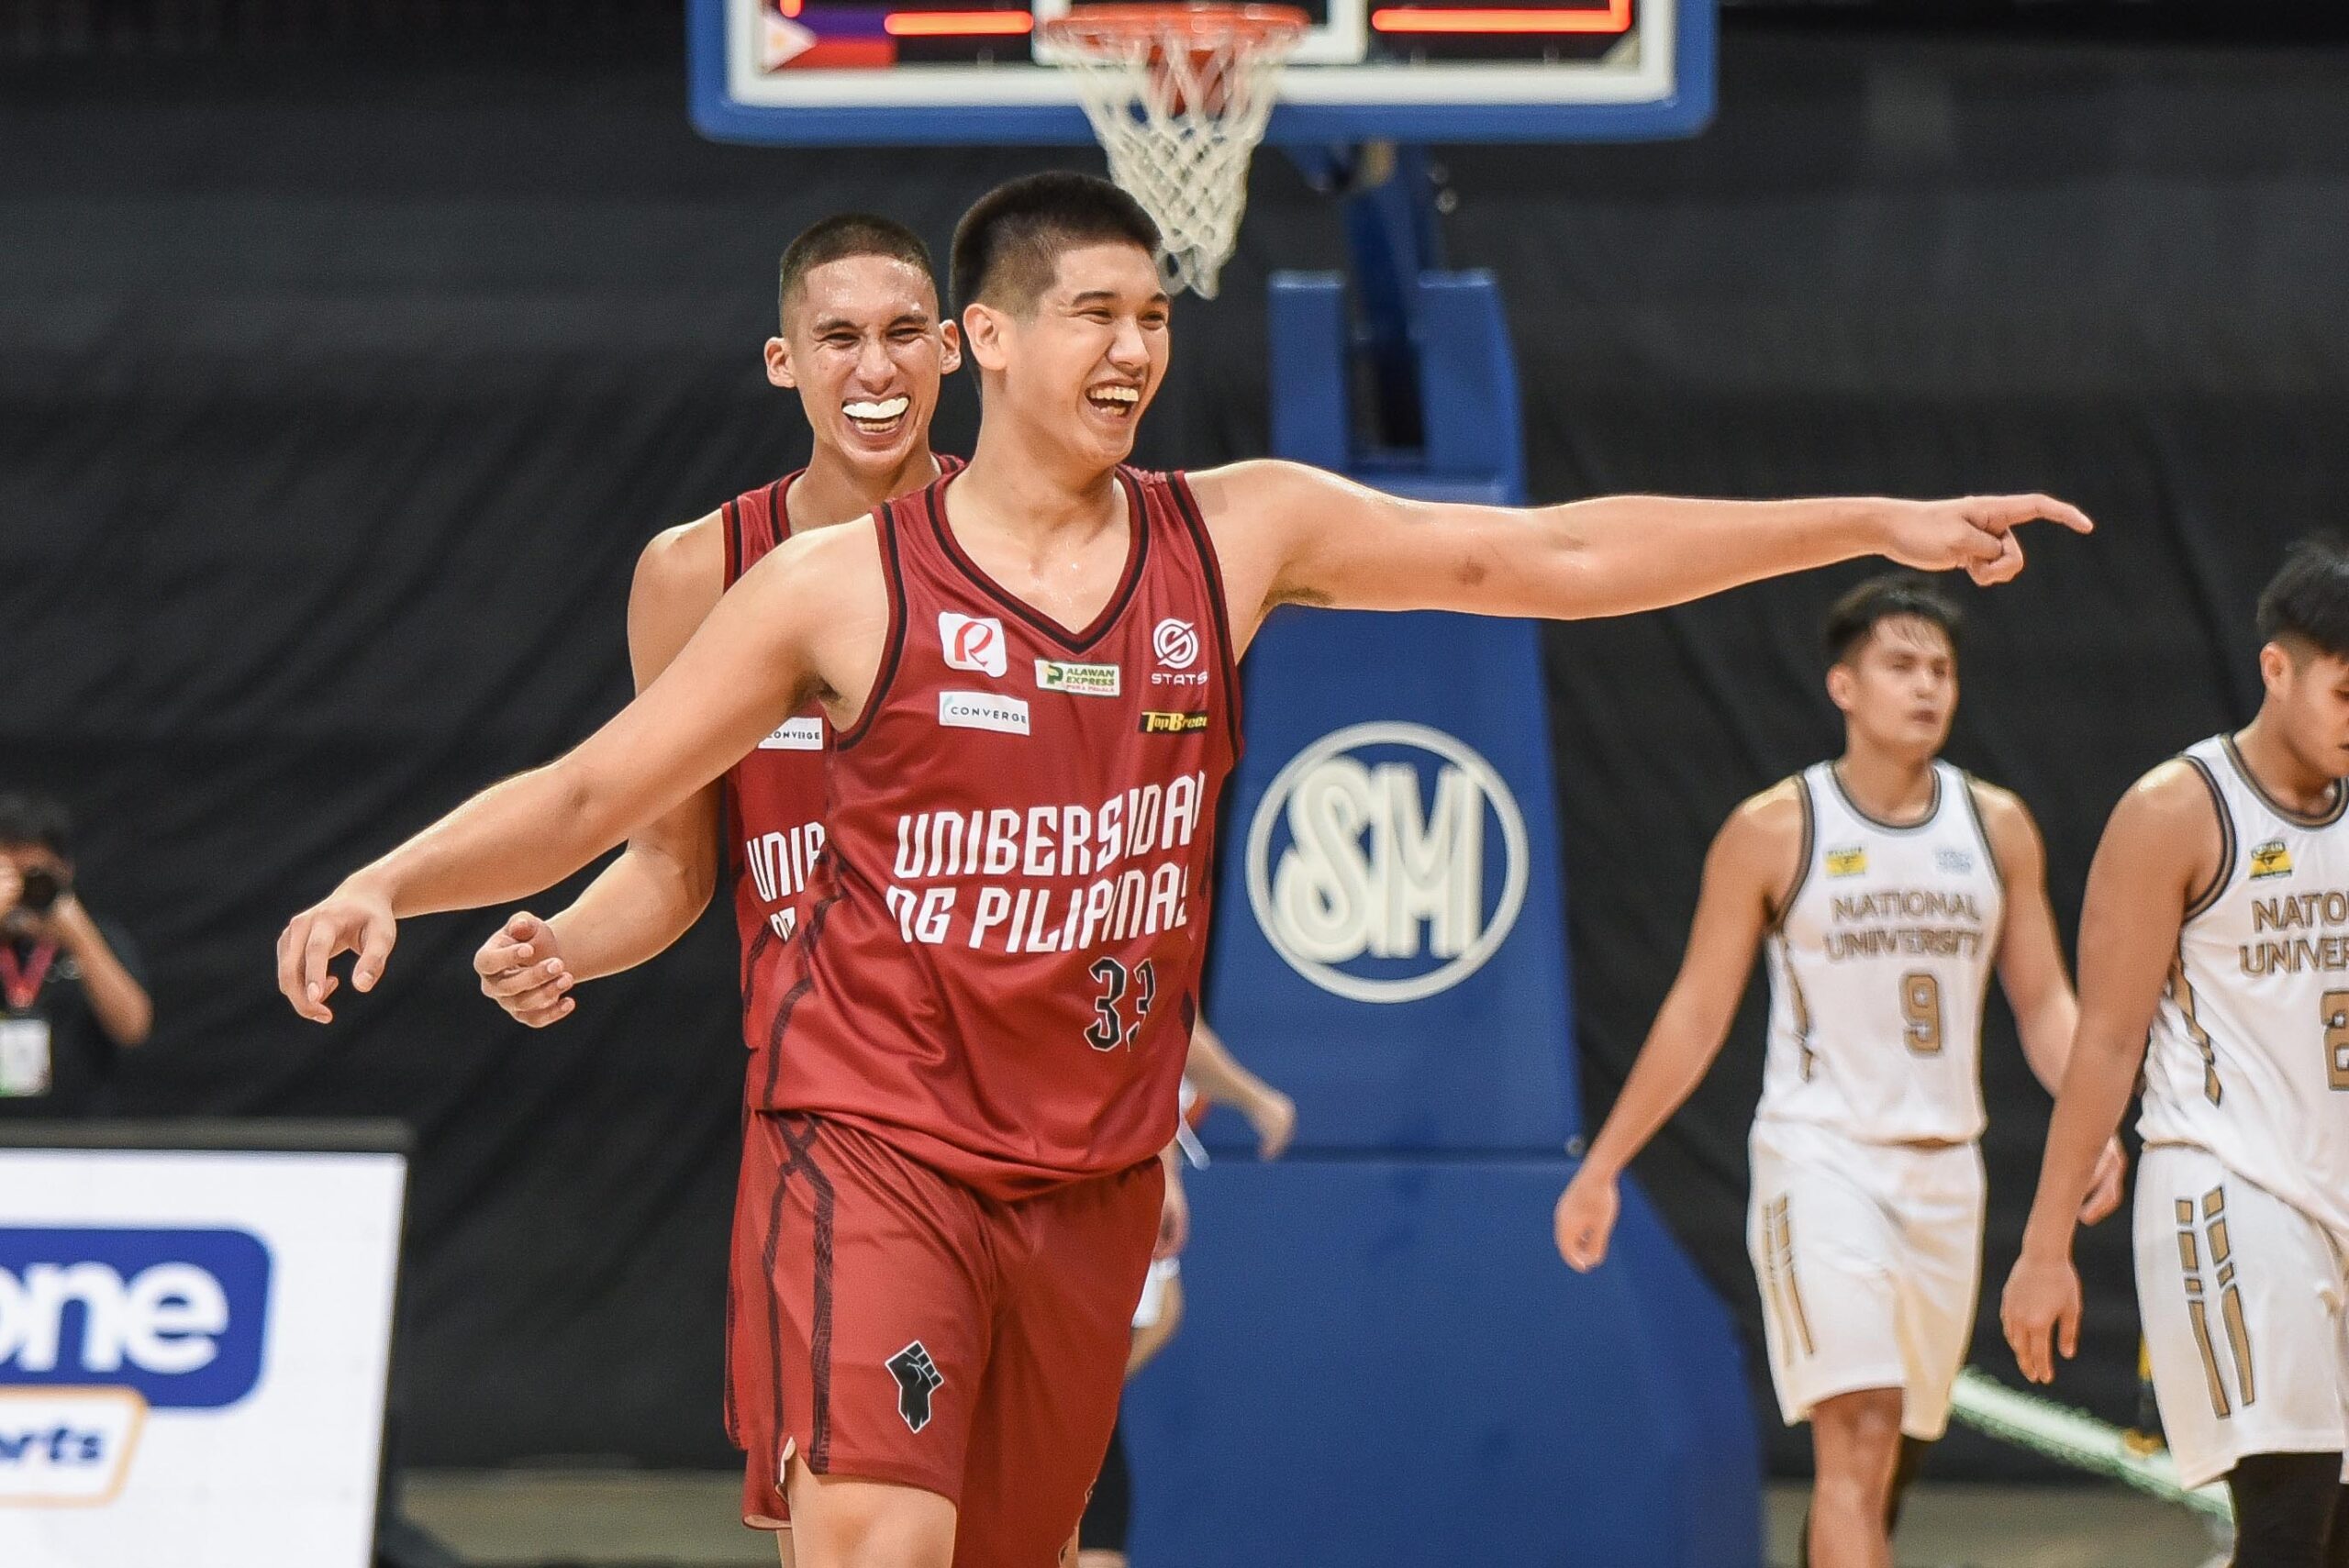 UAAP-84-Mens-Basketball-NU-vs-UP-Carl-Tamayo-Zavier-Lucero-2-scaled Tamayo, Phillips make Mythical Team as UAAP says all-league team is positionless ADMU Basketball DLSU News UAAP UP  - philippine sports news